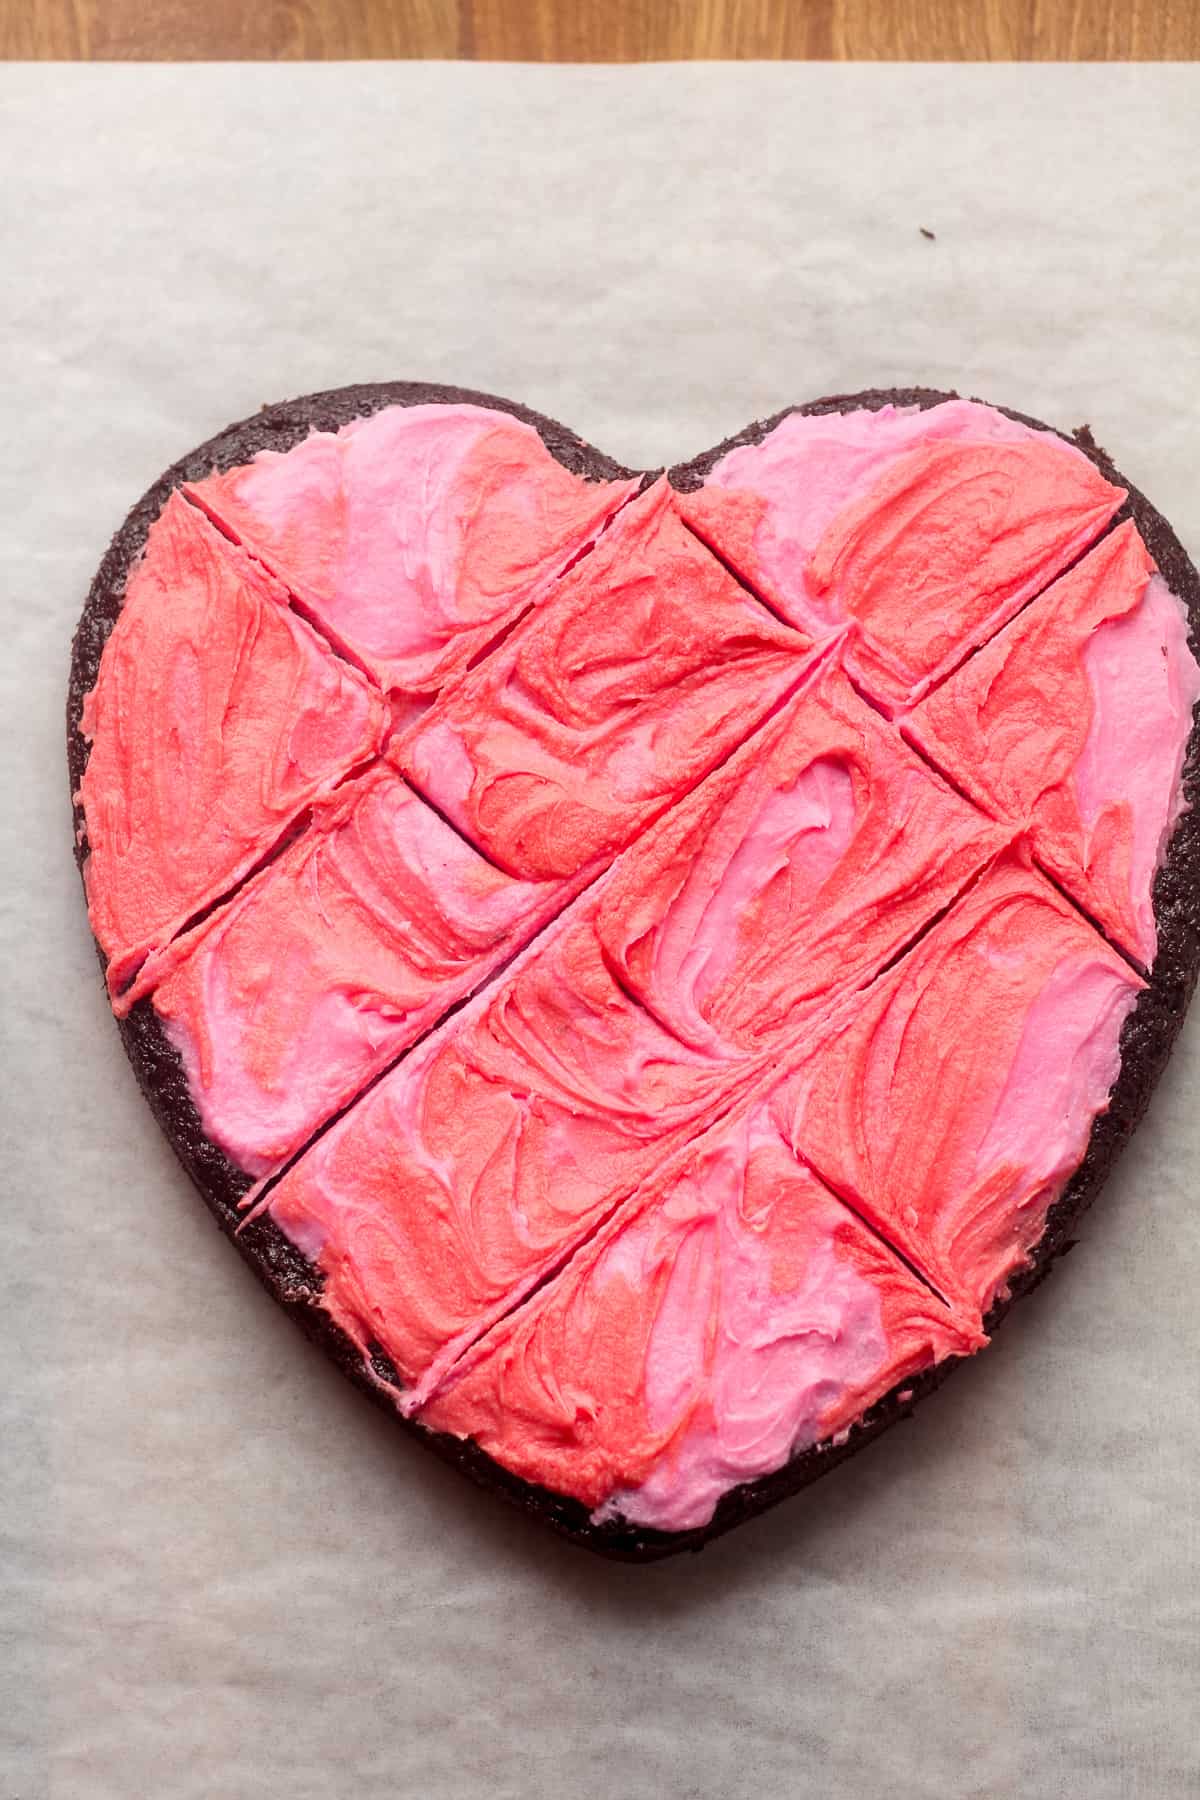 A heart shaped chocolate cake with pink and red buttercream frosting.